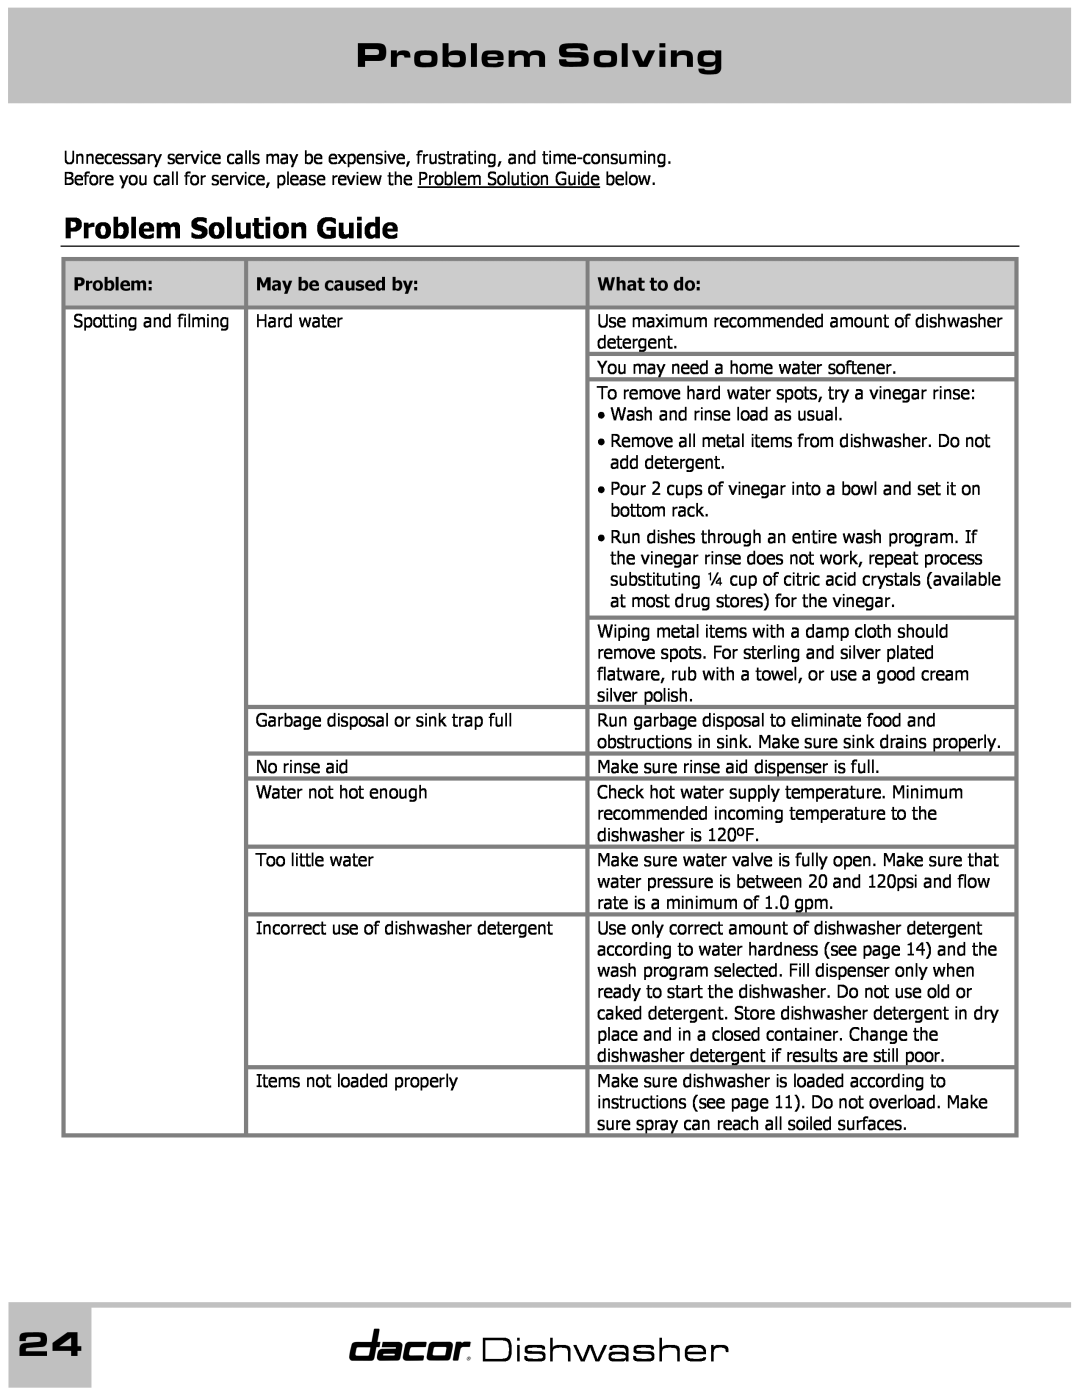 Dacor 65537 manual Problem Solving, Problem Solution Guide, Dishwasher, May be caused by, What to do 